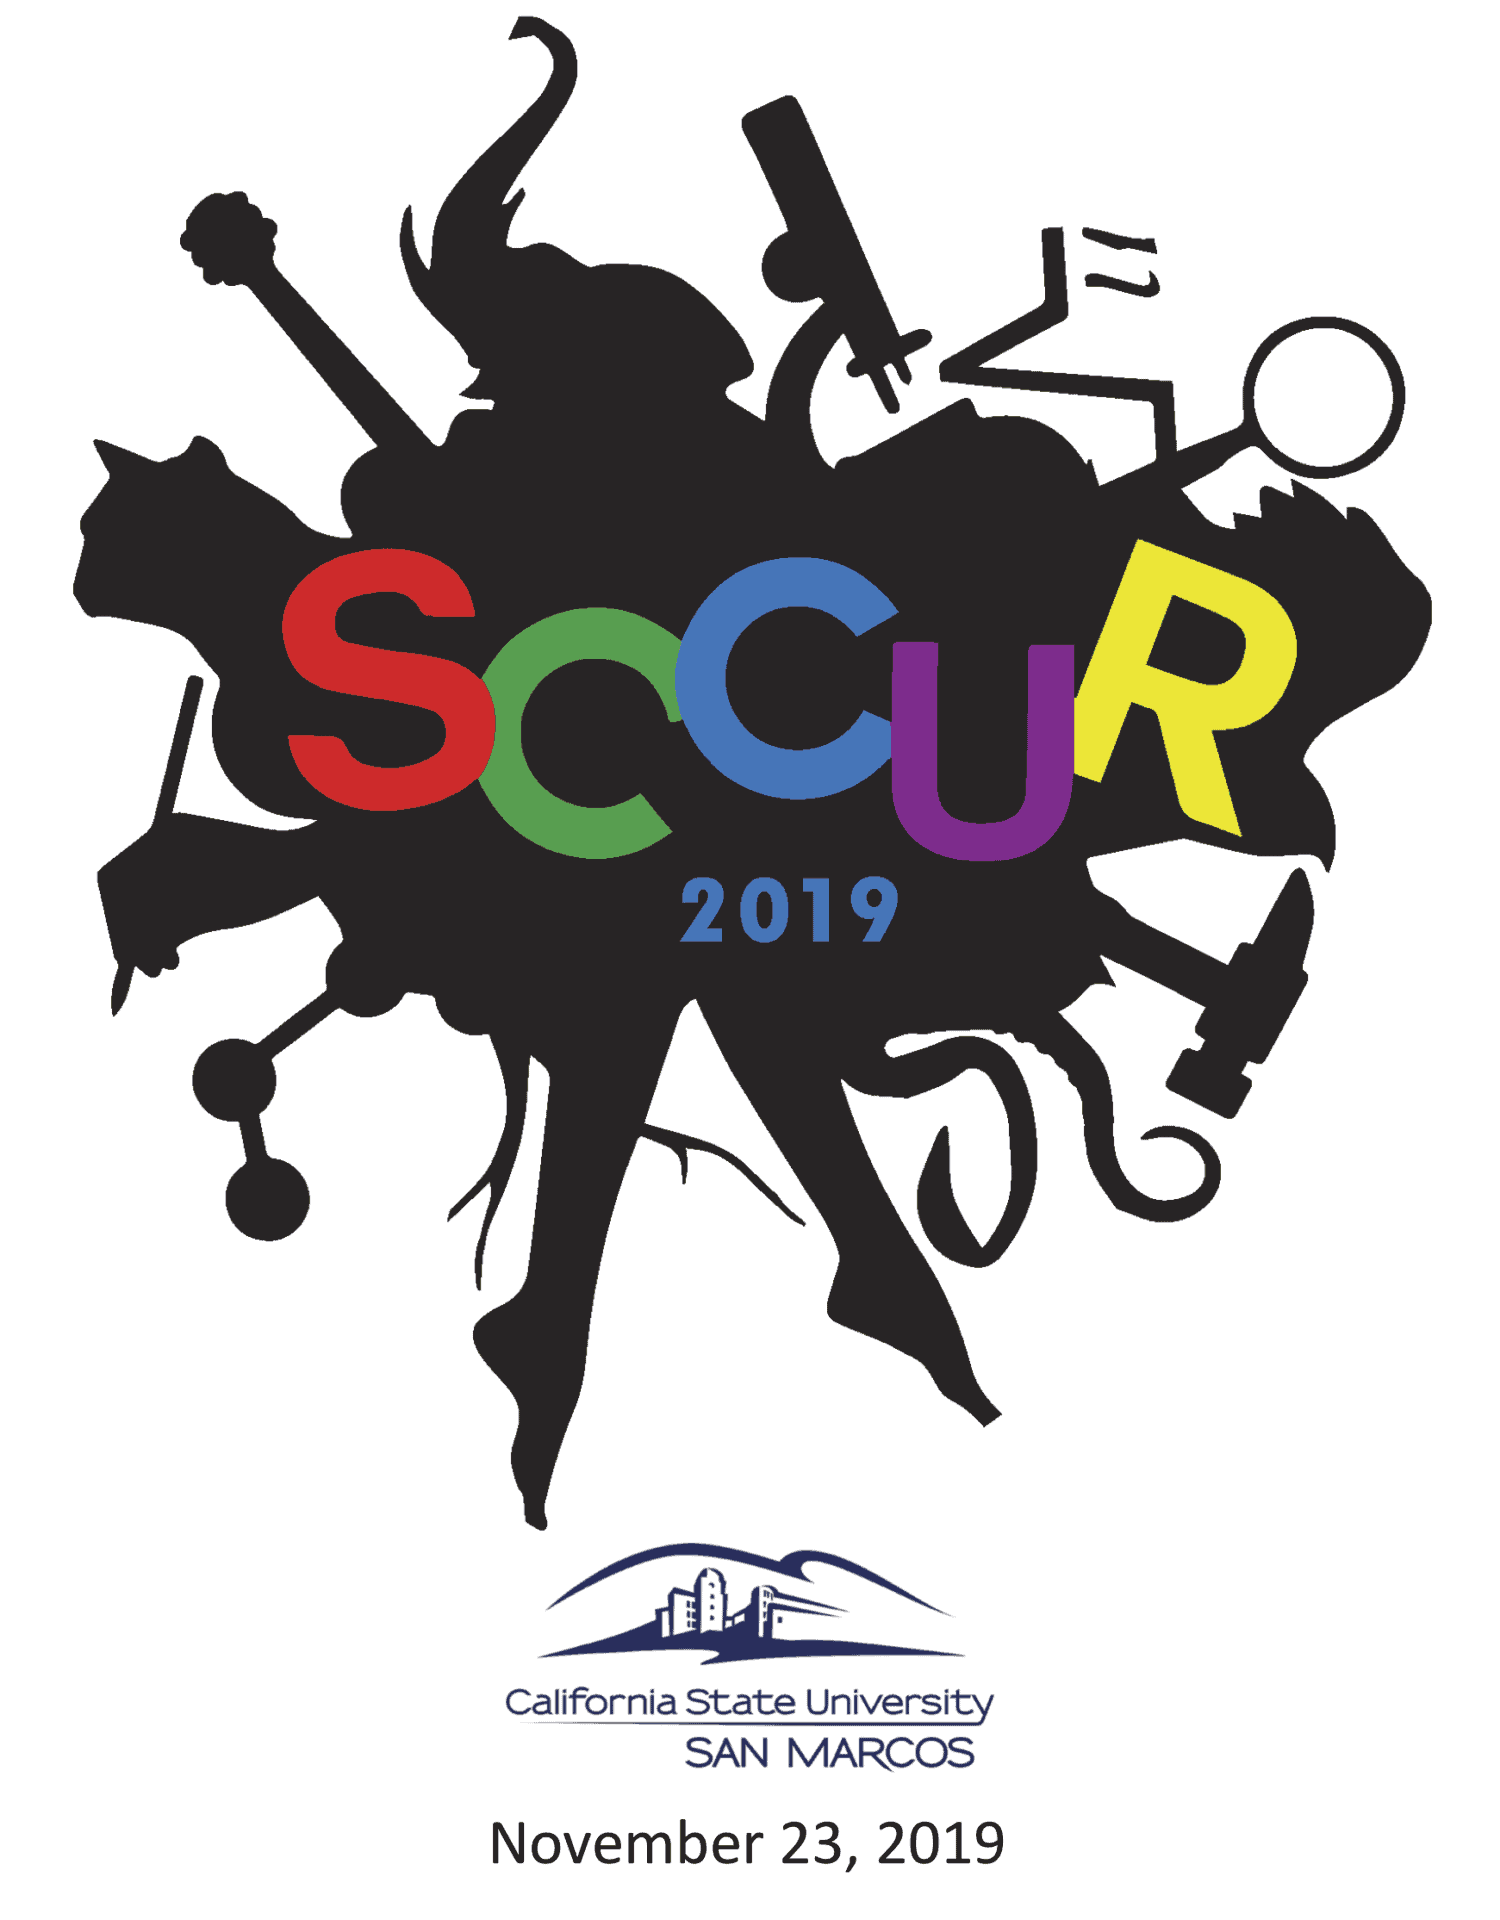 Featured image for “Undergradaute Research: Register Now for the 2019 SCCUR”